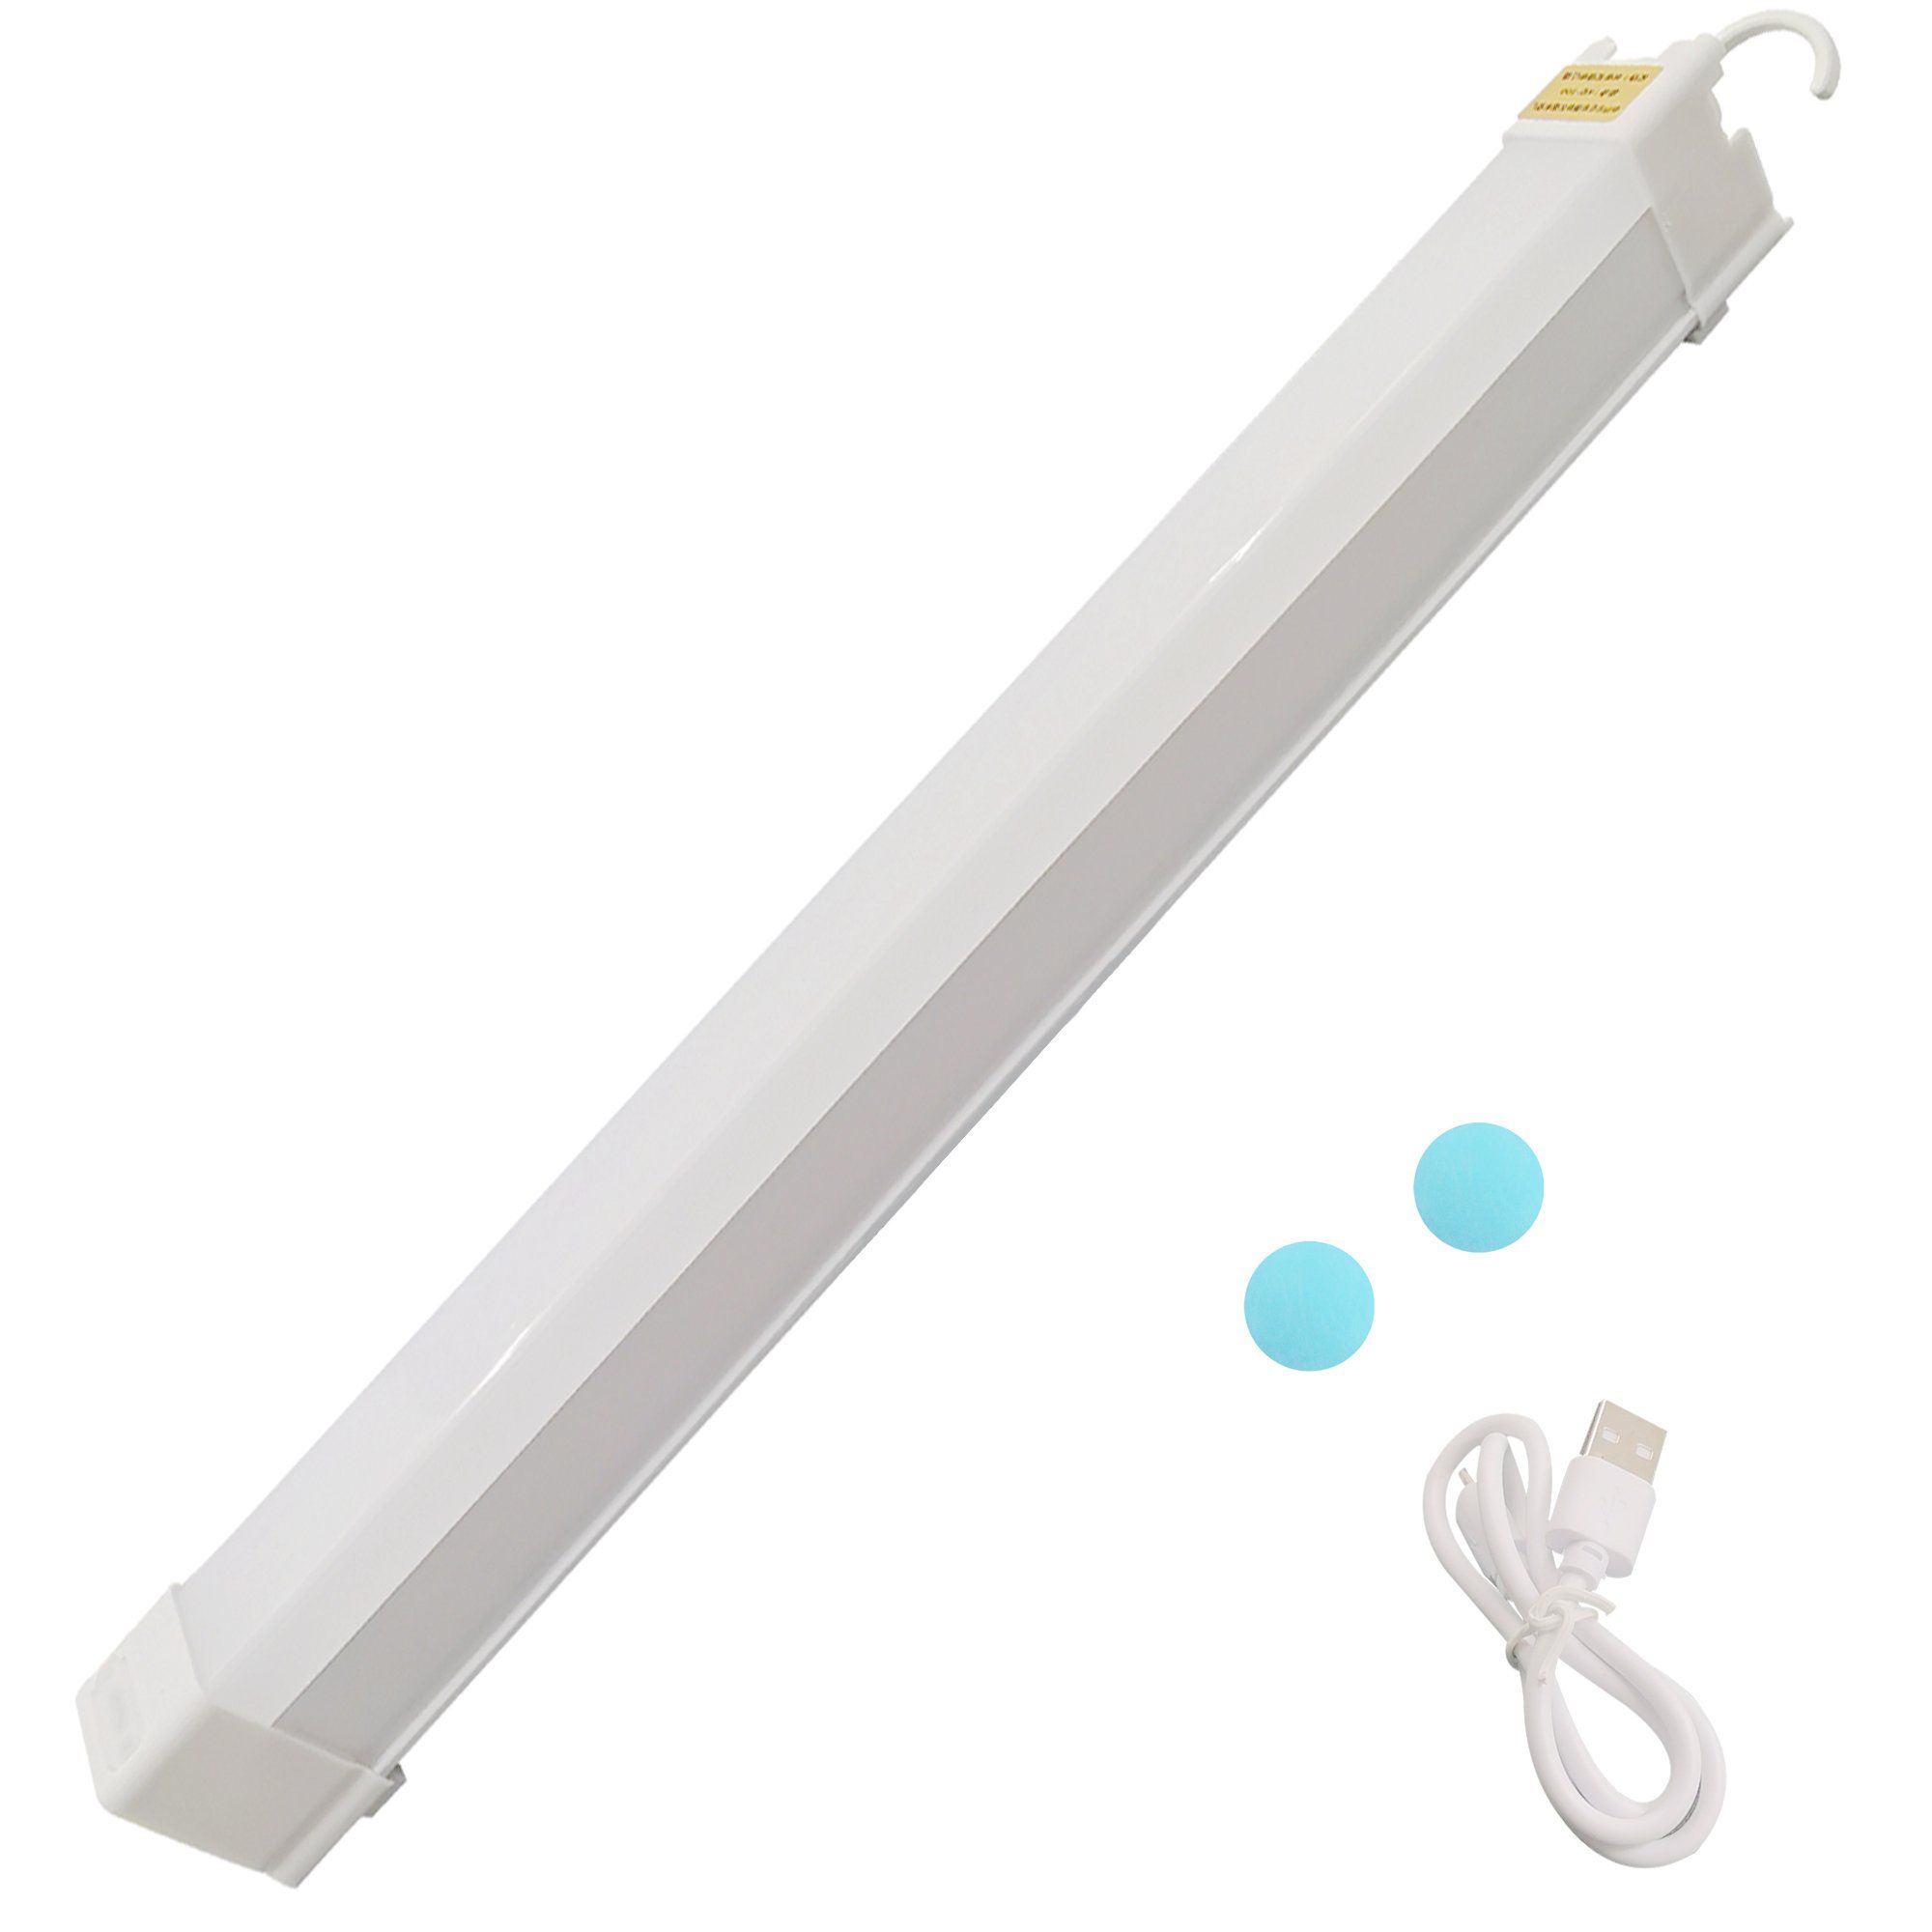 Rechargeable USB Waterproof Magnet LED Light